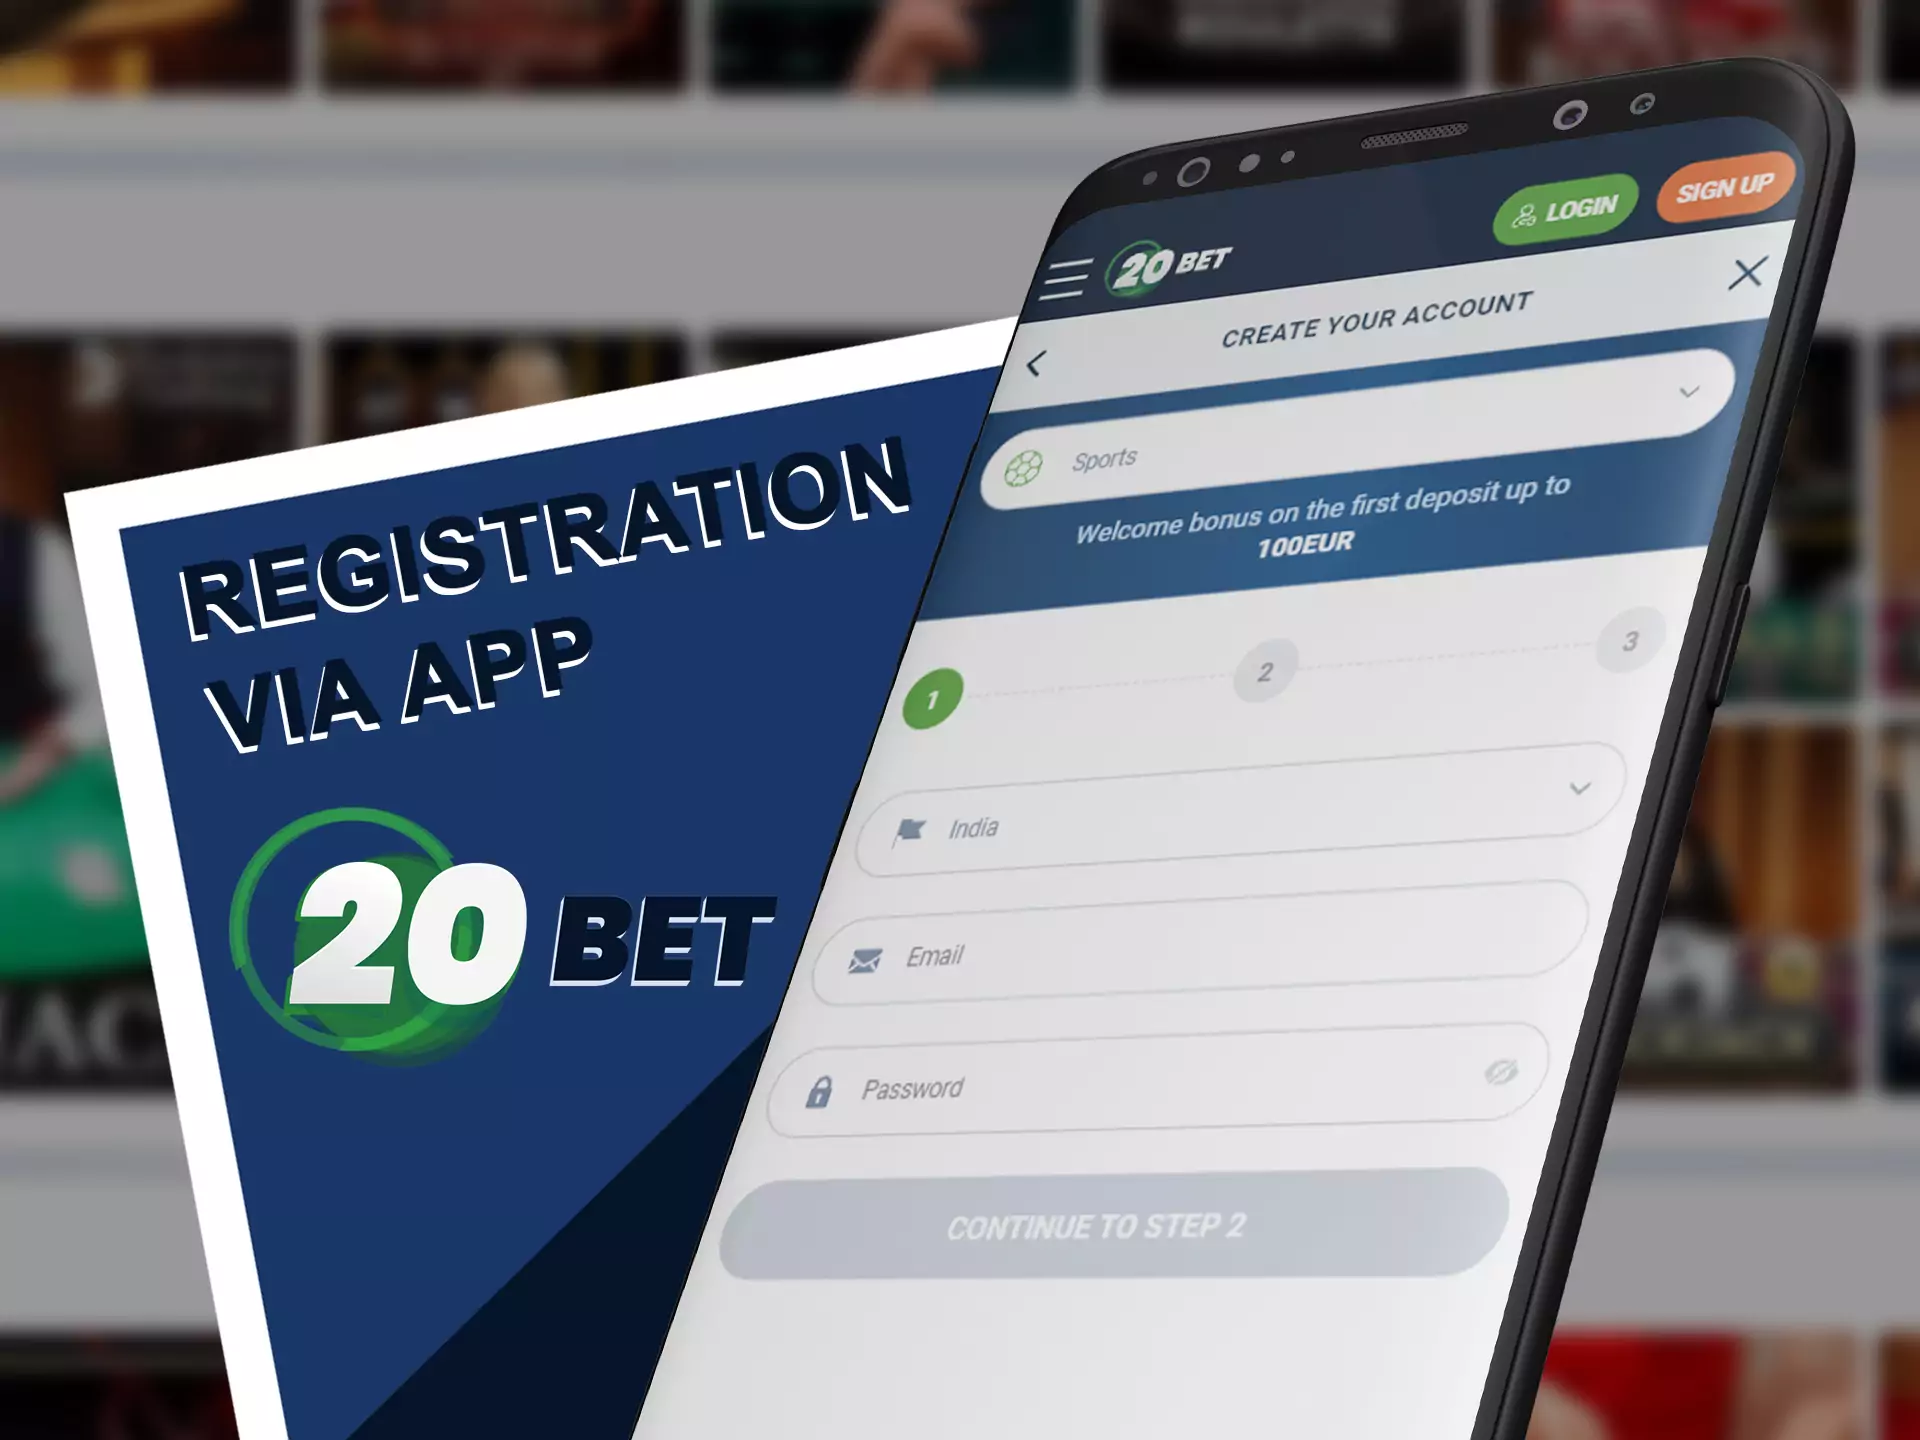 You can simply register in 20bet app.